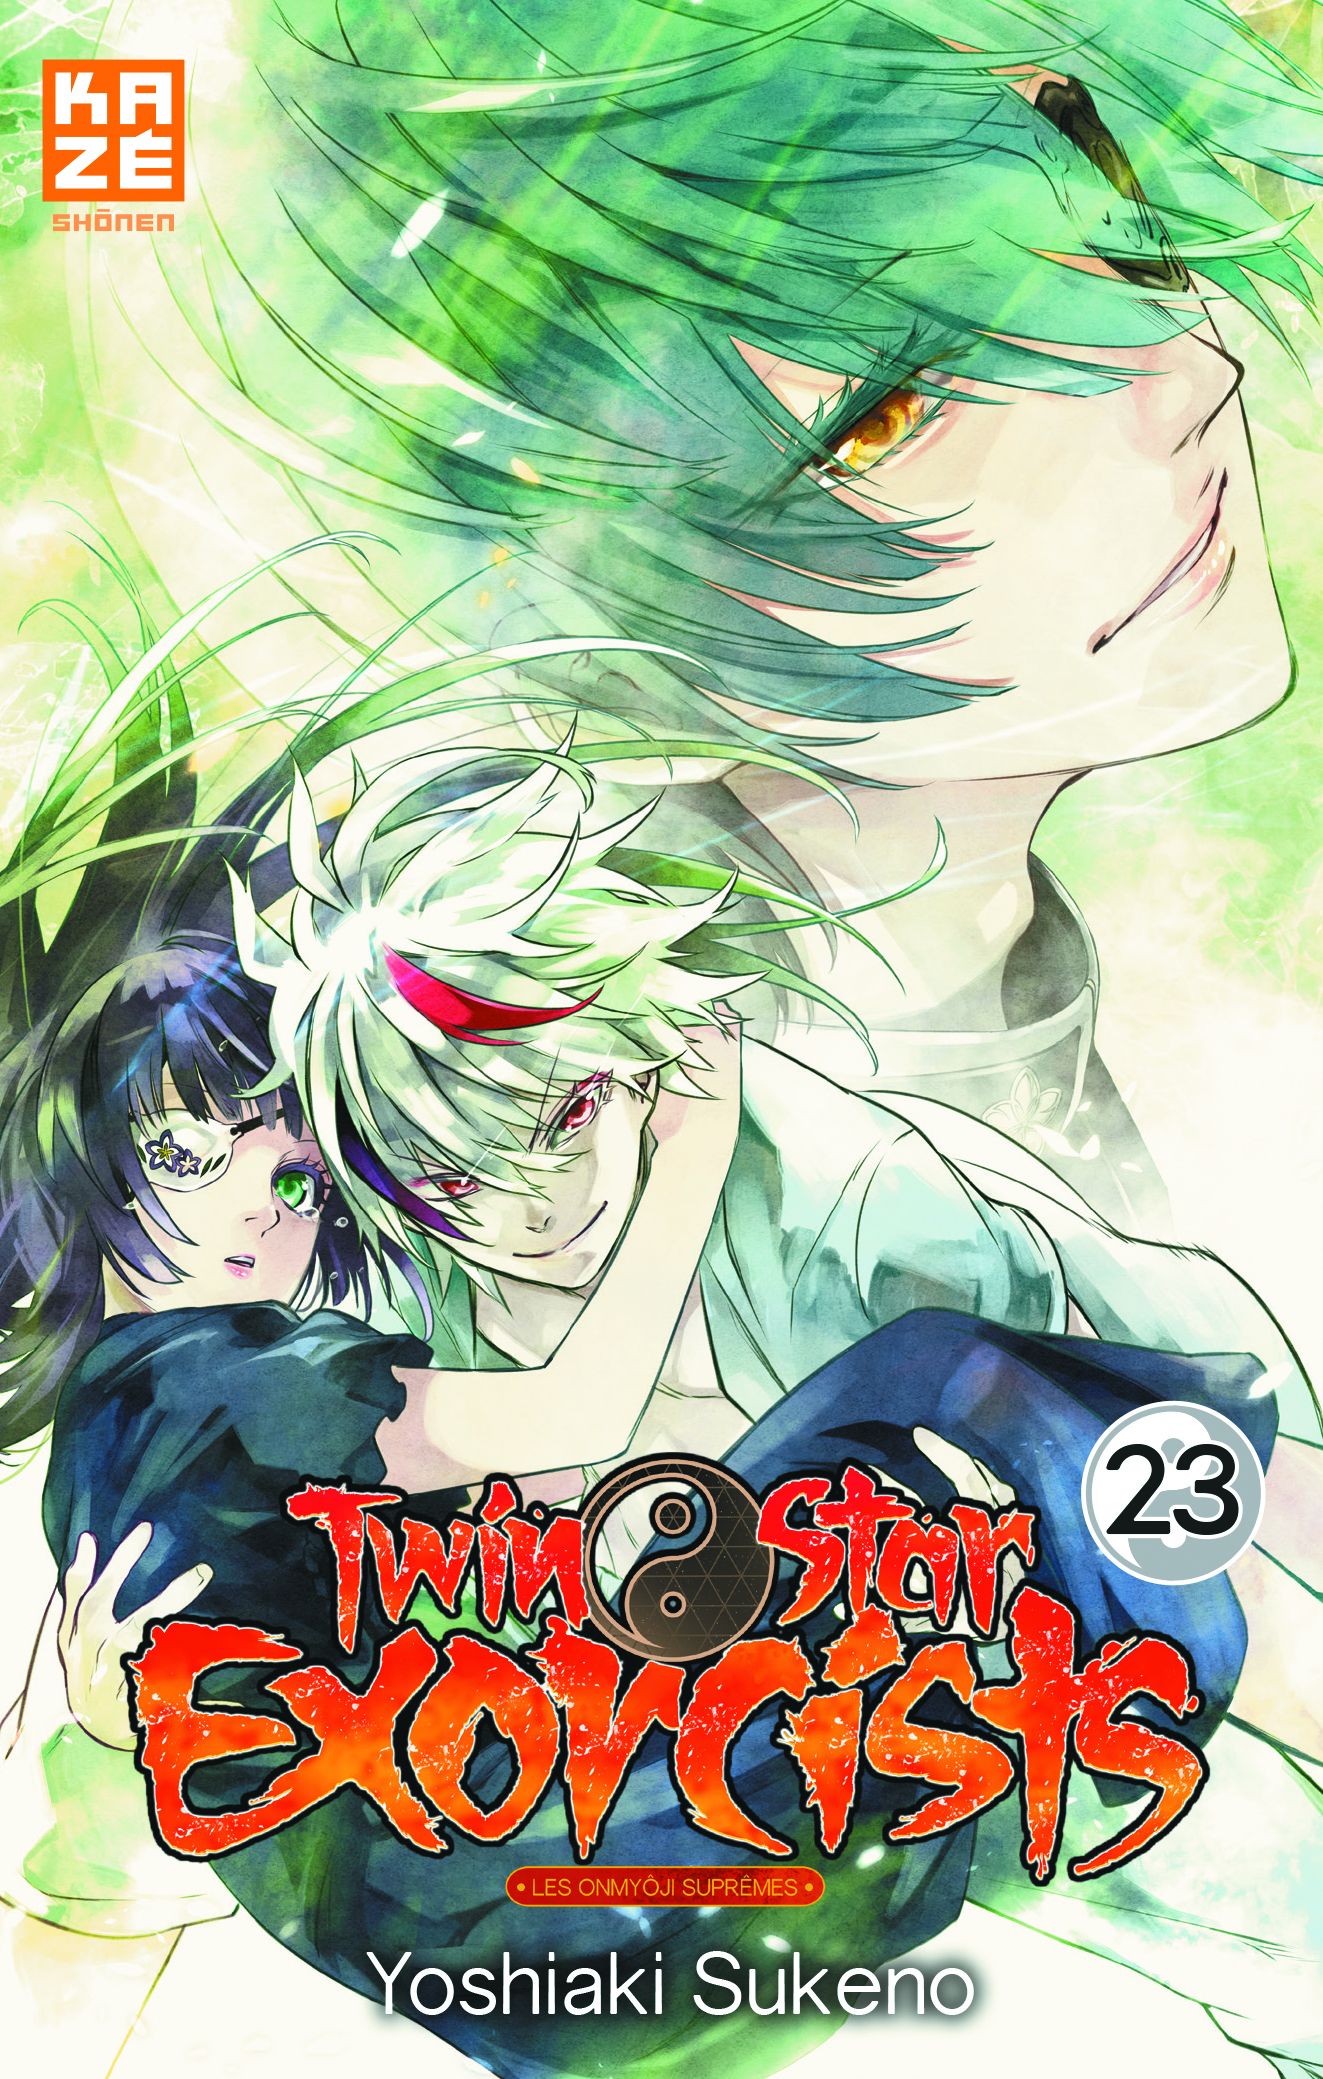 Twin Star Exorcists Vol.23